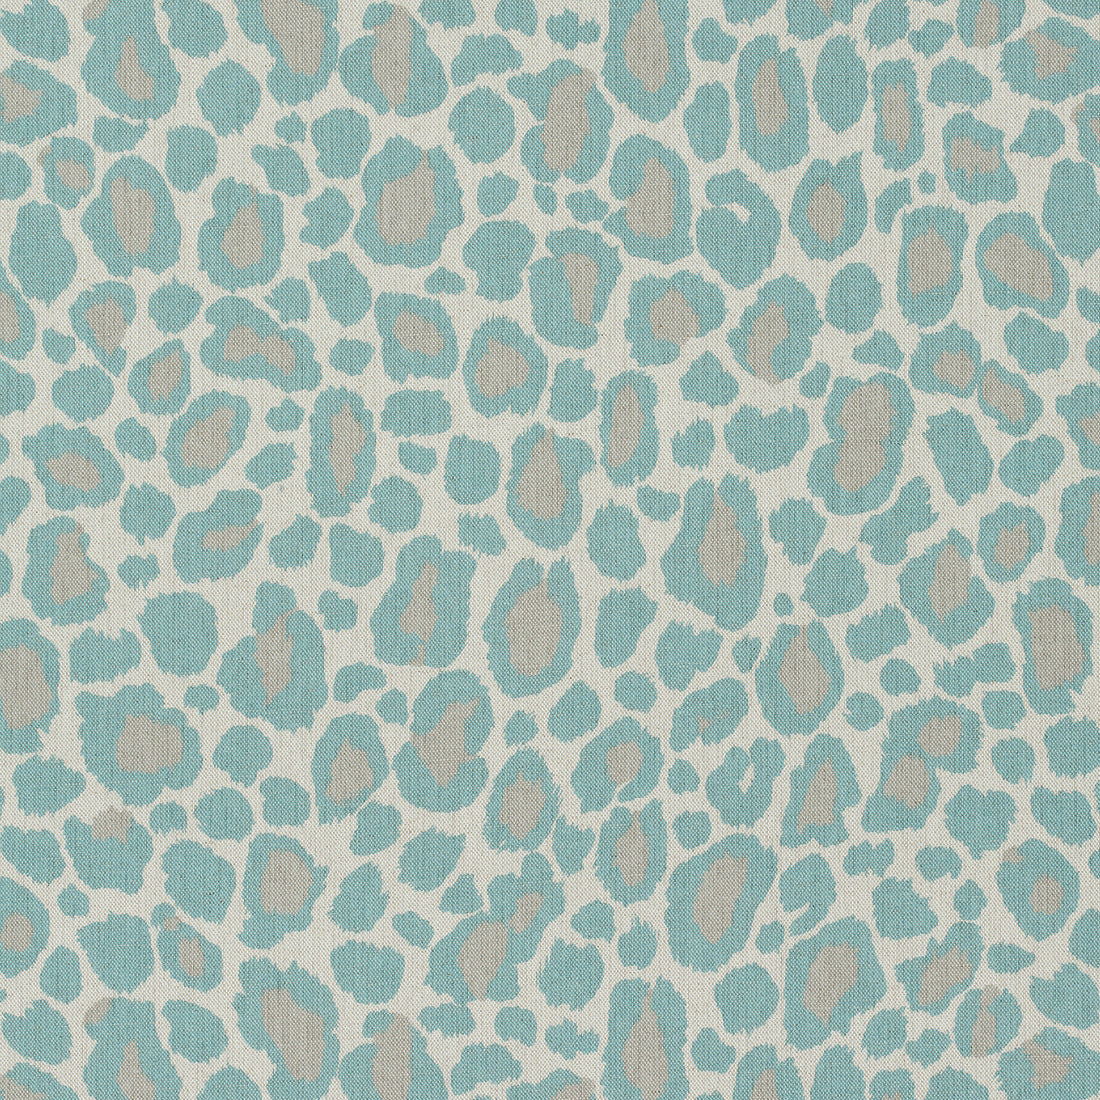 African Leopard fabric in aqua color - pattern number AF72977 - by Anna French in the Manor collection